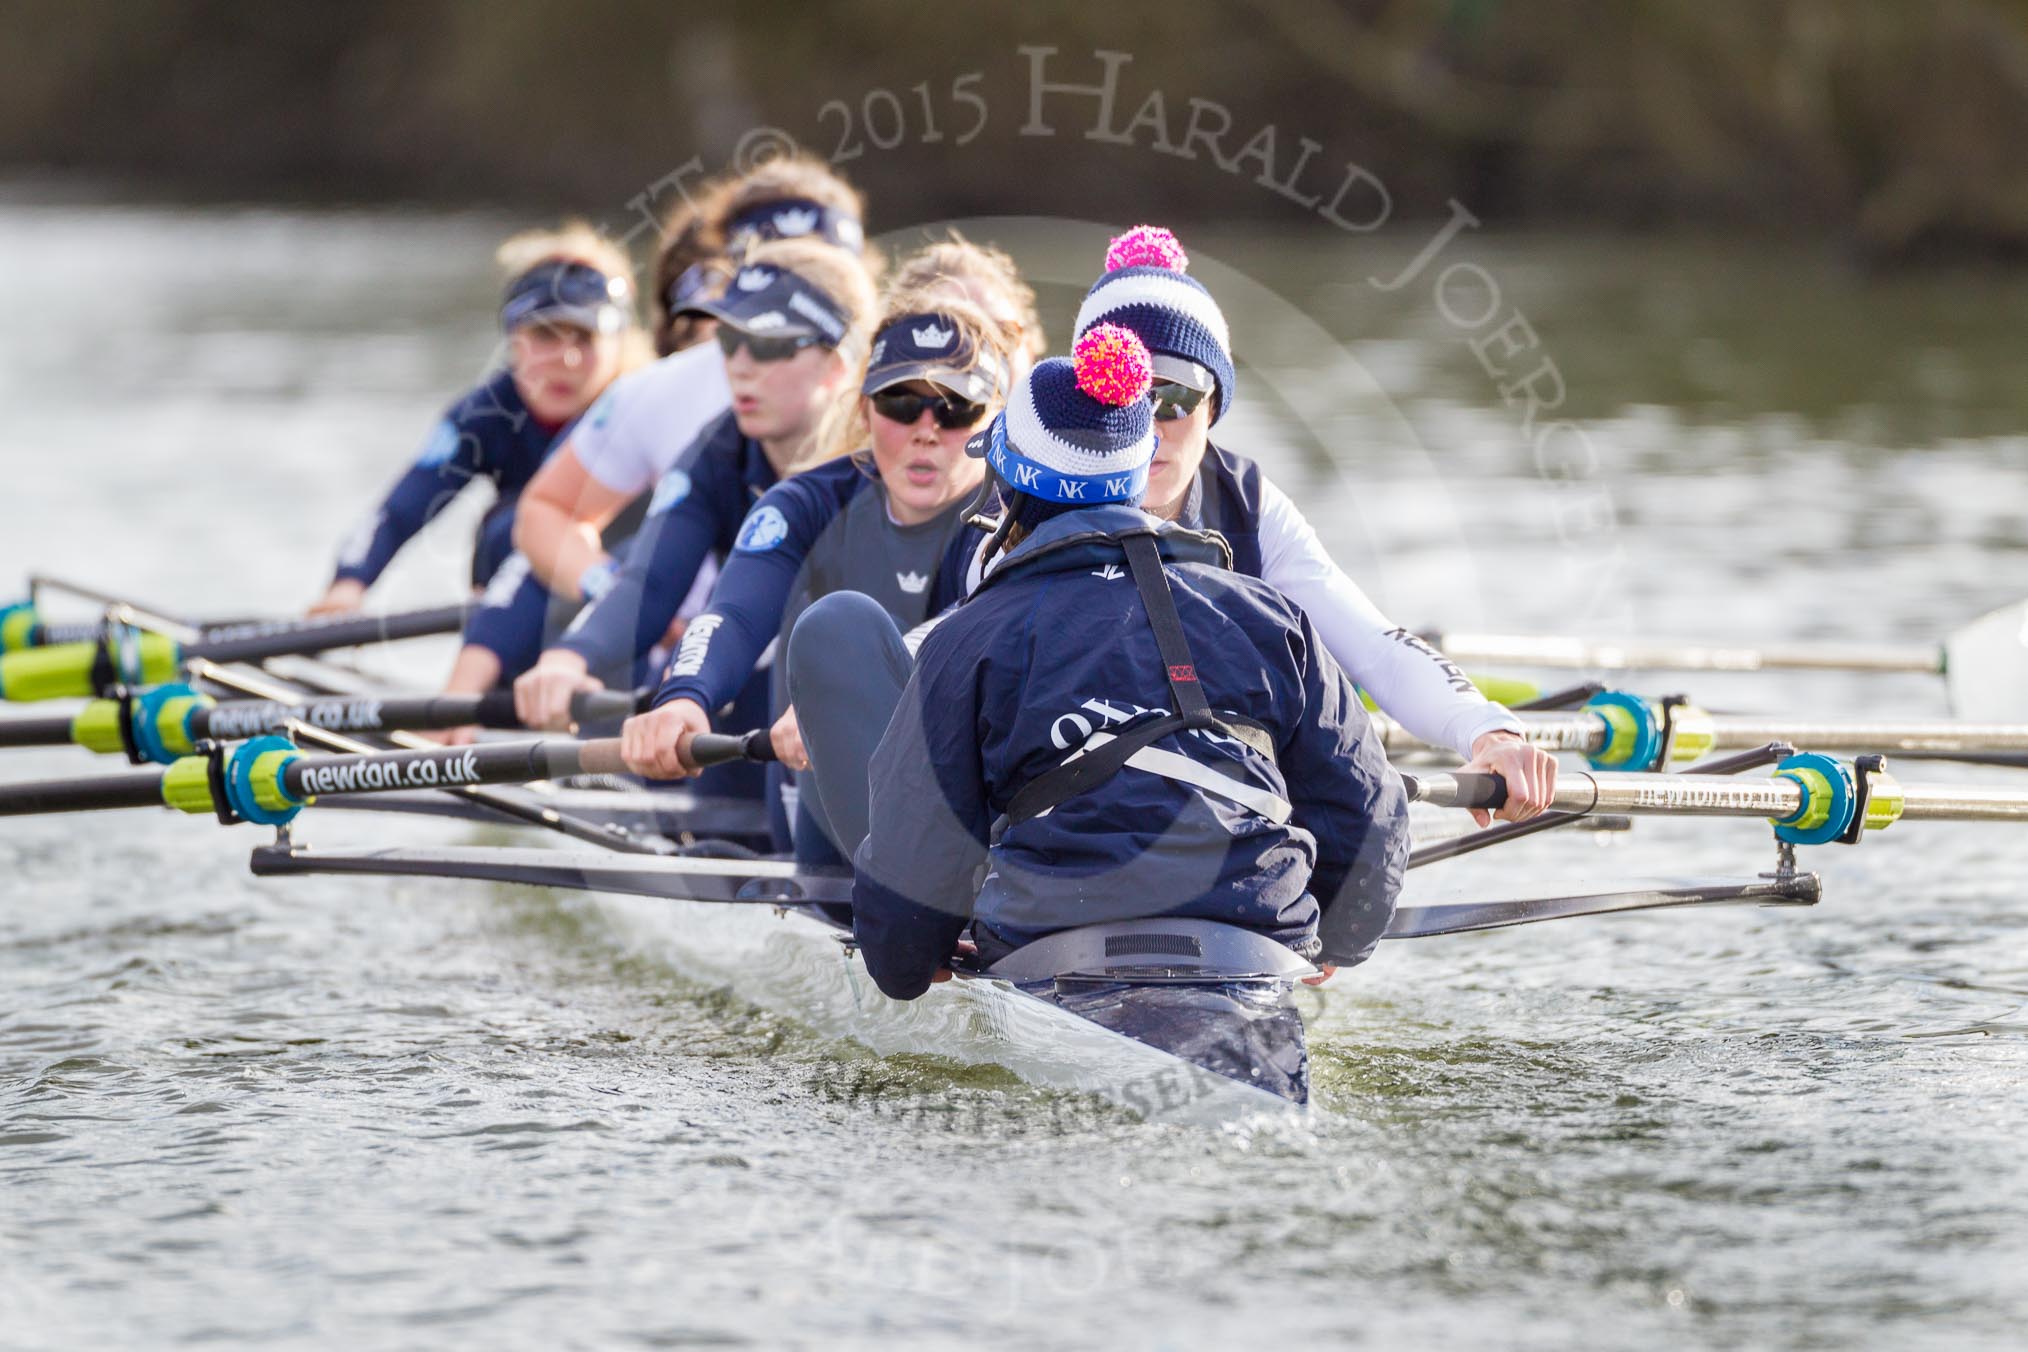 The Boat Race season 2015: OUWBC training Wallingford.

Wallingford,

United Kingdom,
on 04 March 2015 at 15:43, image #51